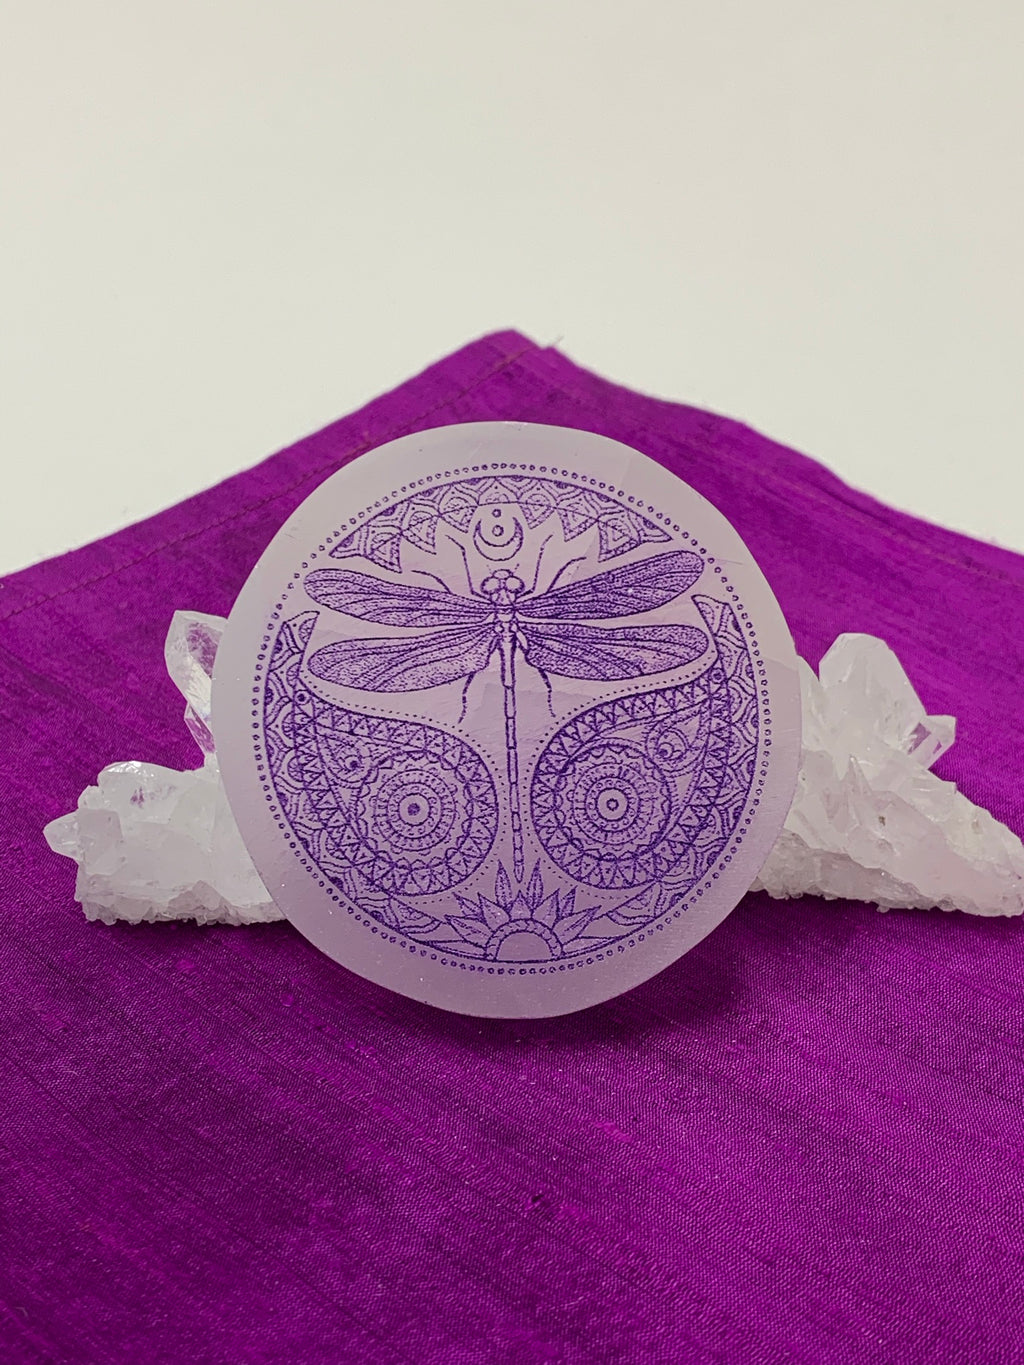 Beautiful 3" ornate dragonfly with flowing and detailed designs surrounding it is etched on smooth white selenite with the etching painted in purple. Dragonfly can represent emergence, dispelling of illusion and transformation. The selenite ranges from translucent to milky white in color. Weight varies, but the average is 4.9 oz. Size is approximately 3 inches in diameter and is approximately ½" thick. The selenite is ethically sourced and workers are paid living wages.